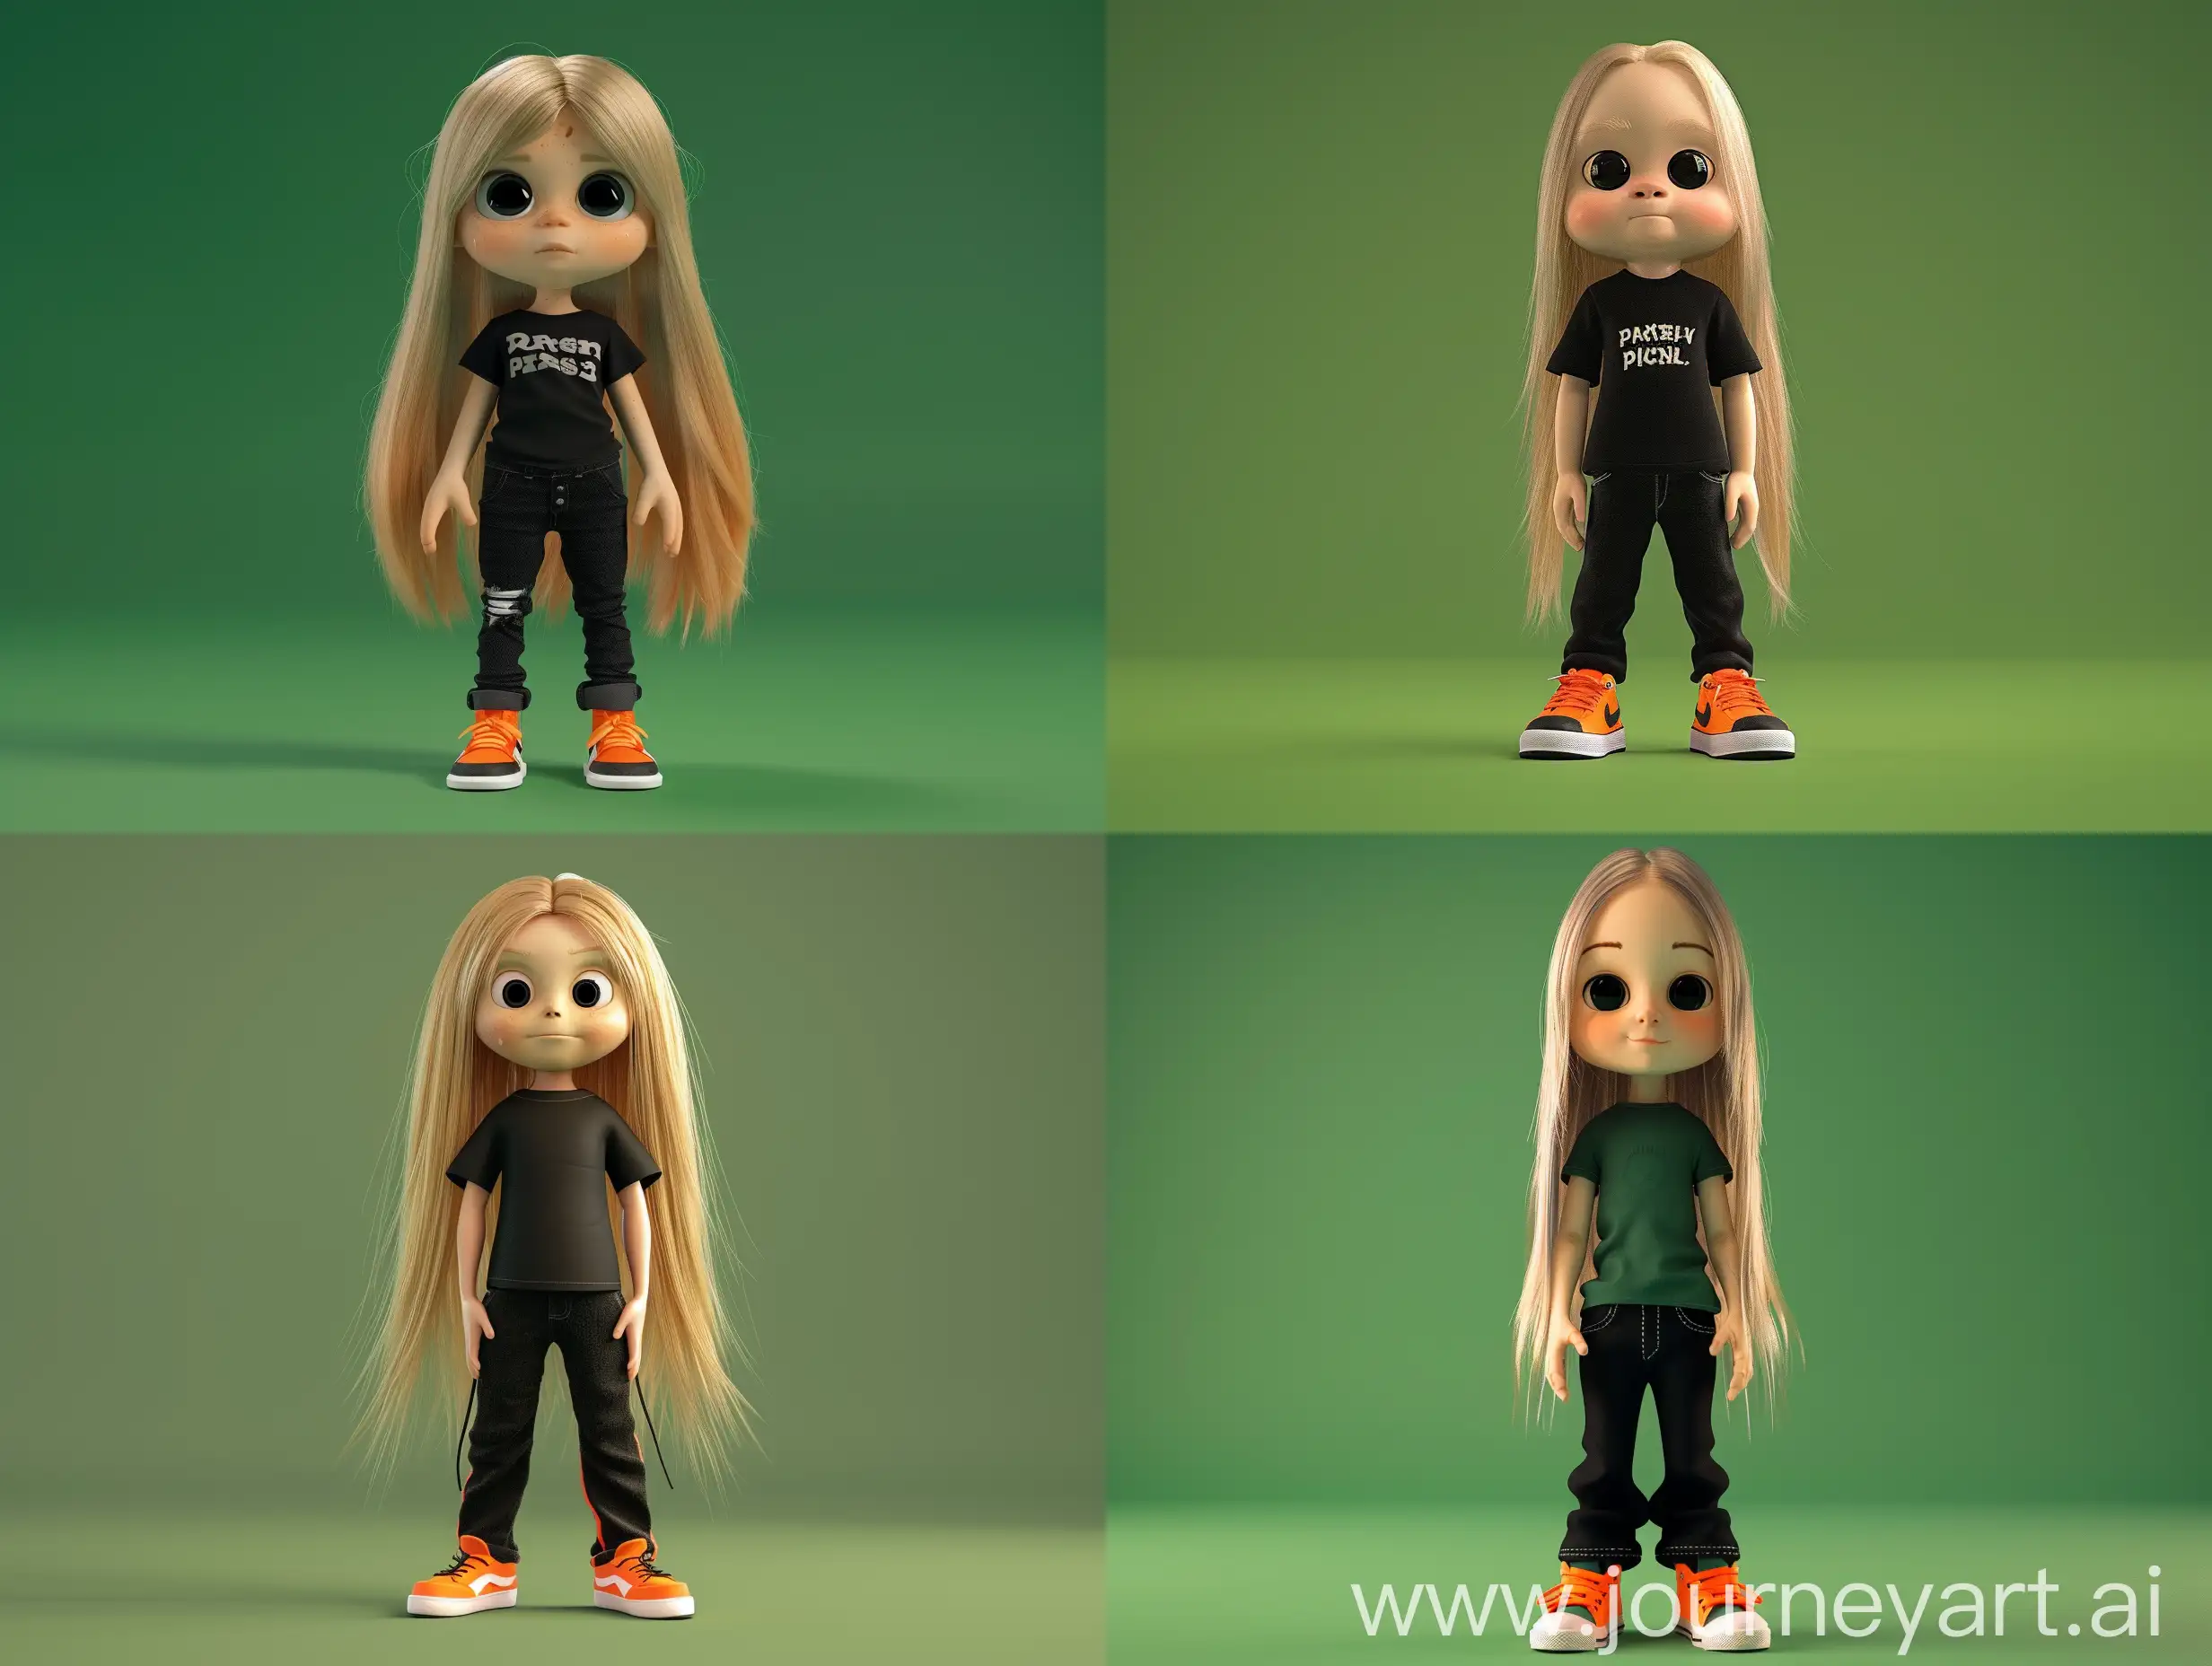 create the 3D drawing, disney pixar style,  of a 3-year-old boy alone, long straight blond hair, black eyes, wearing black pants, t-shirt and orange sneakers, standing full body, with green background, best image in 8K